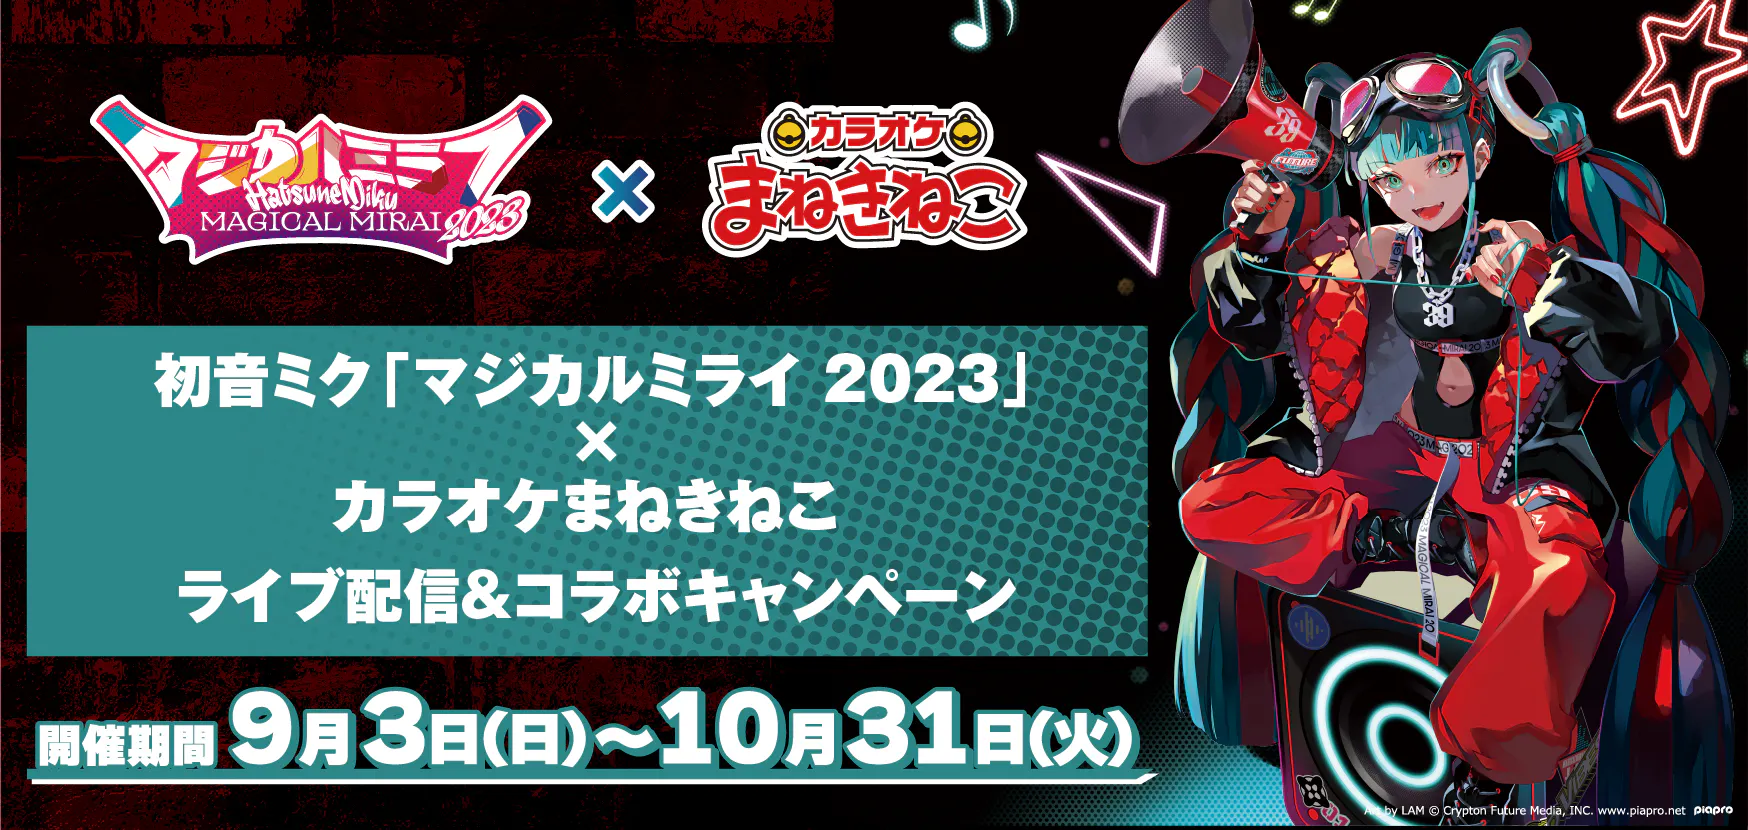 Upcoming BanG Dream! x Persona 5 collab event is too anime to handle